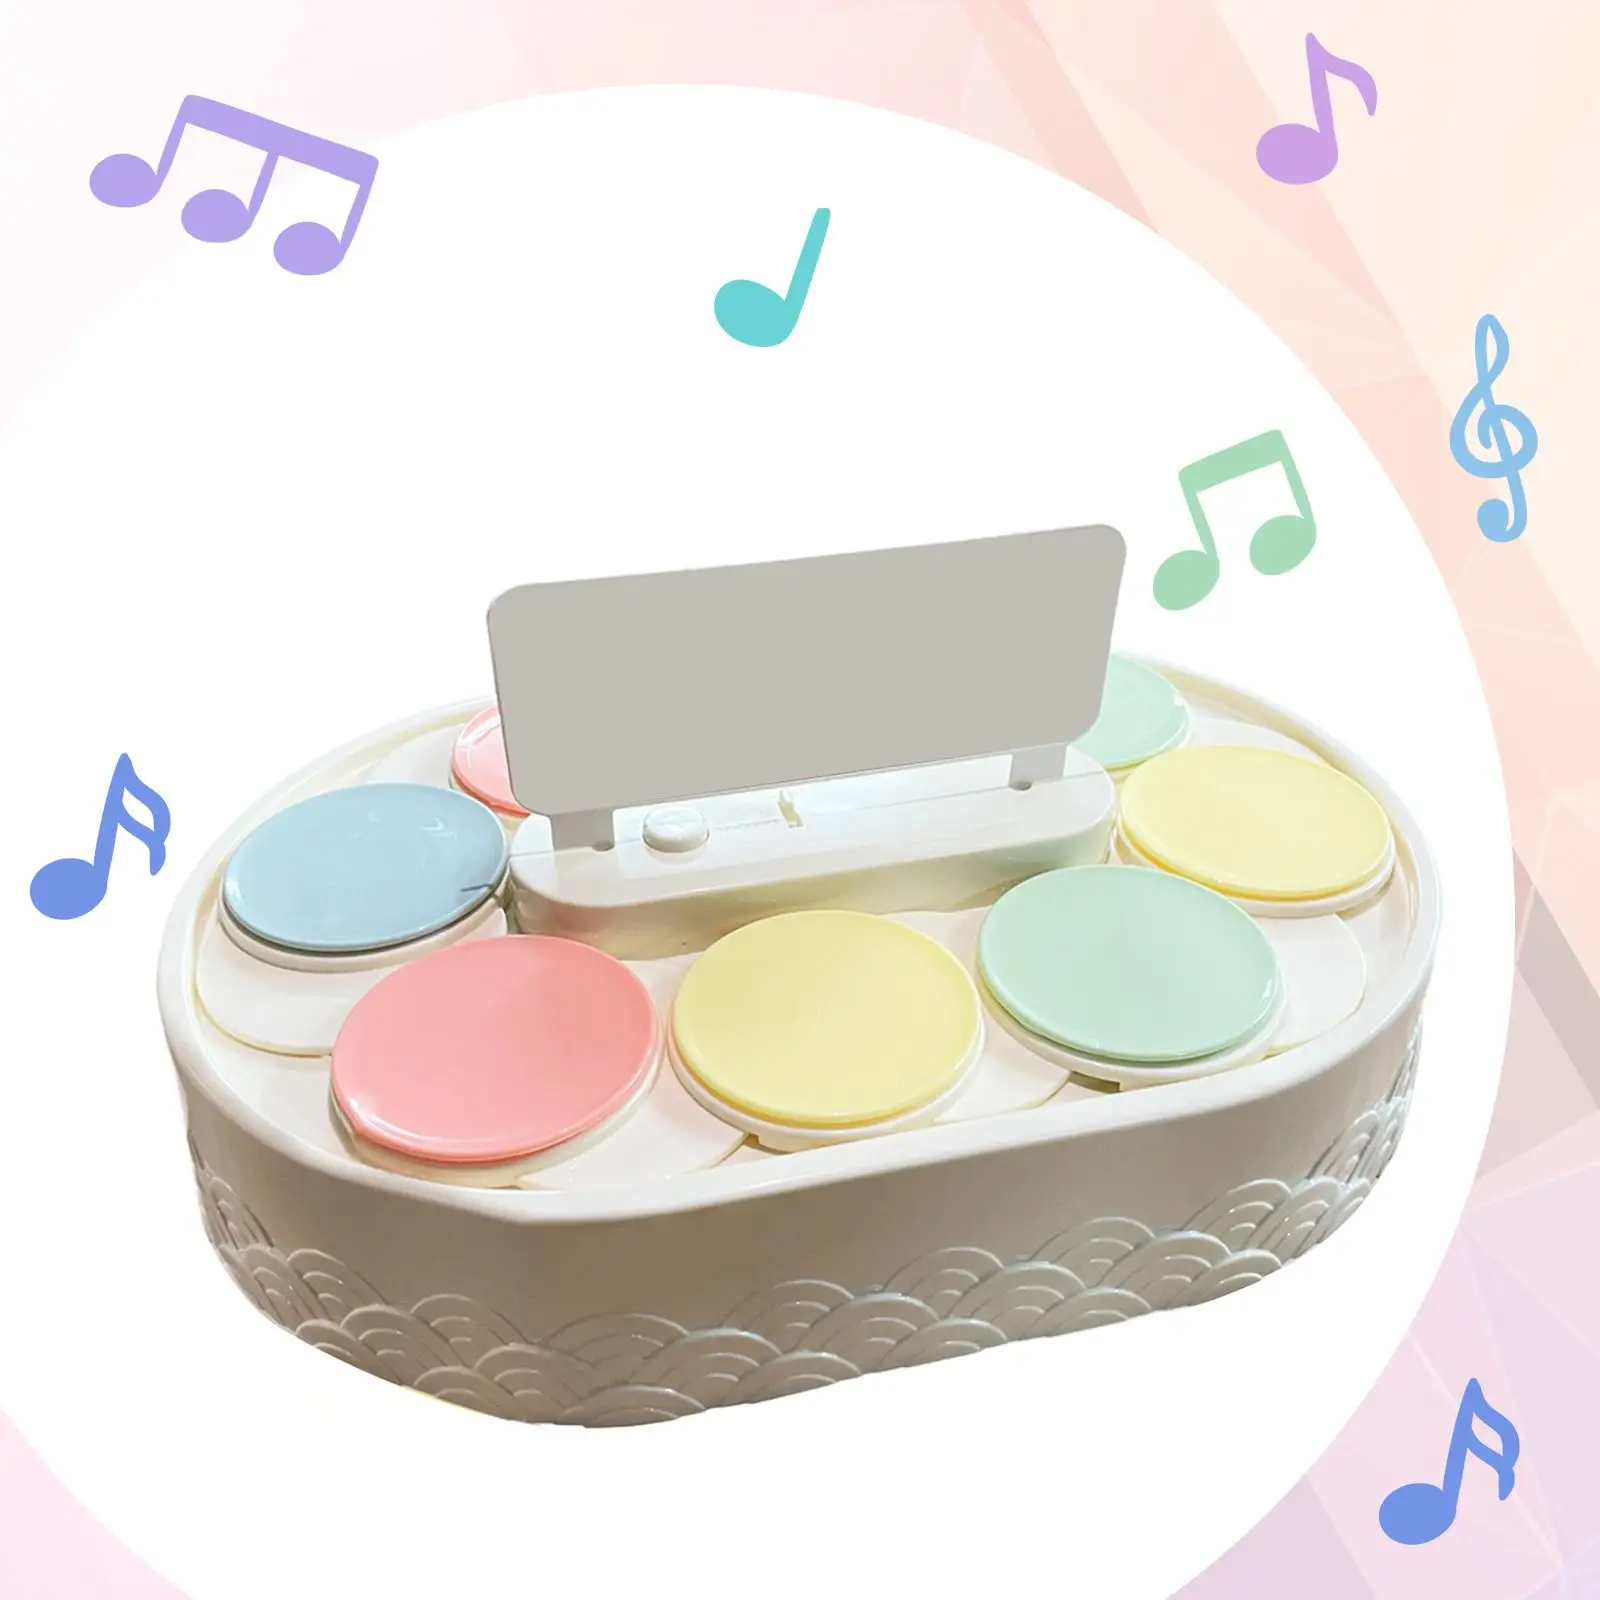 Automatic Rotating Plates Pastries Dessert Display Turntable Cupcake Display Stand for Jewelry Cupcakes Kitchen Decoration